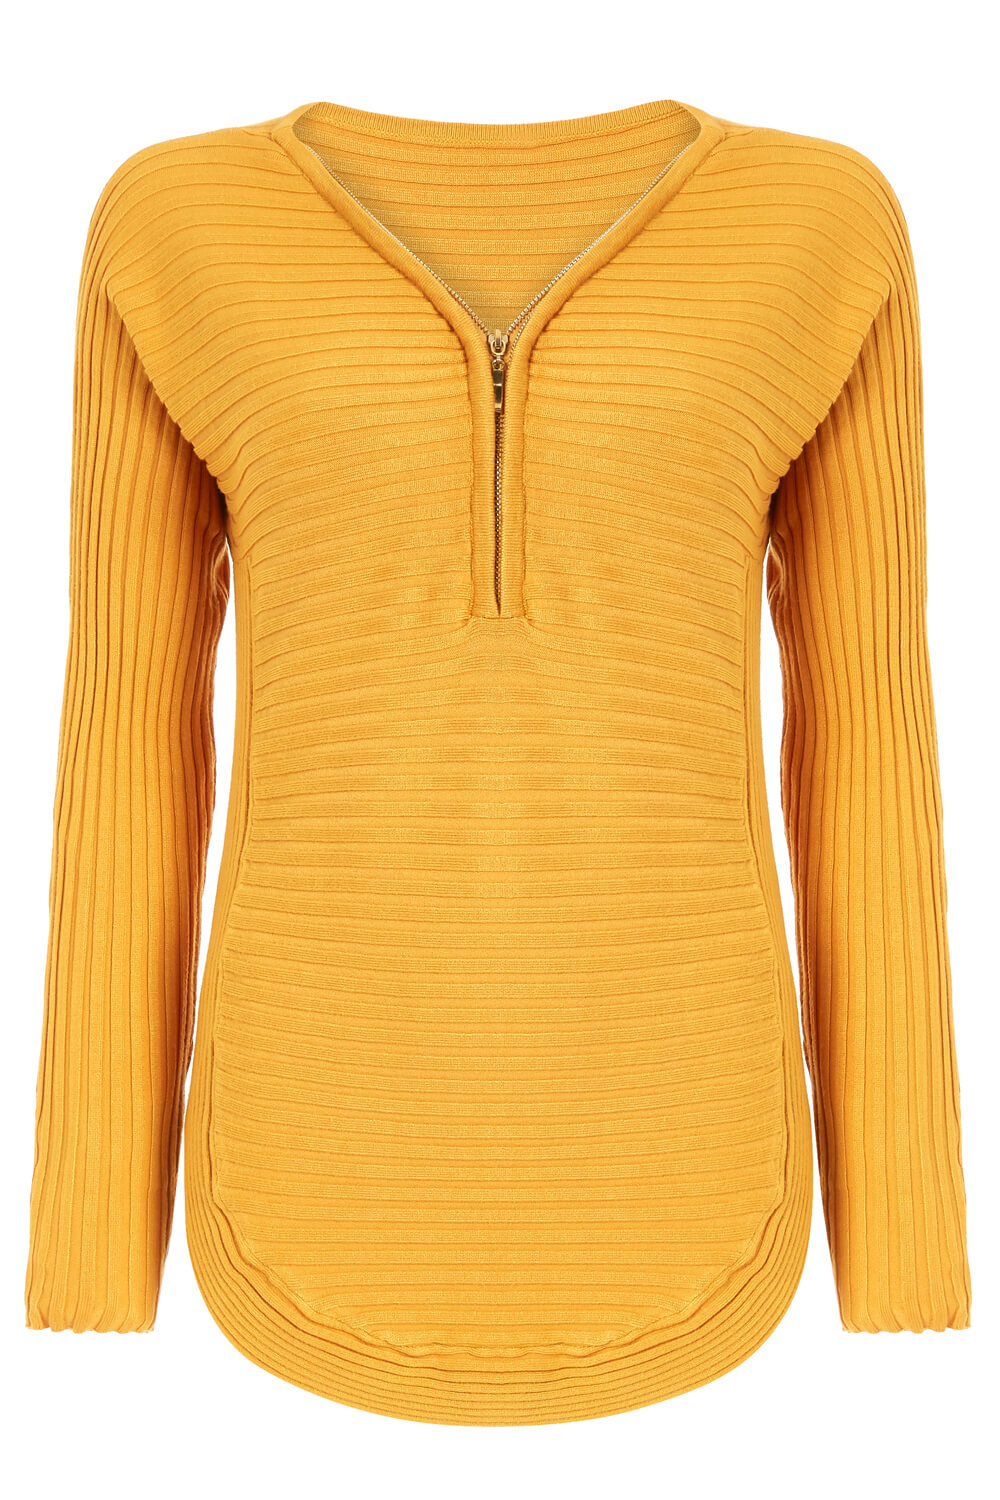 Gold Zip Front V Neck Jersey Long Sleeve Top, Image 5 of 5